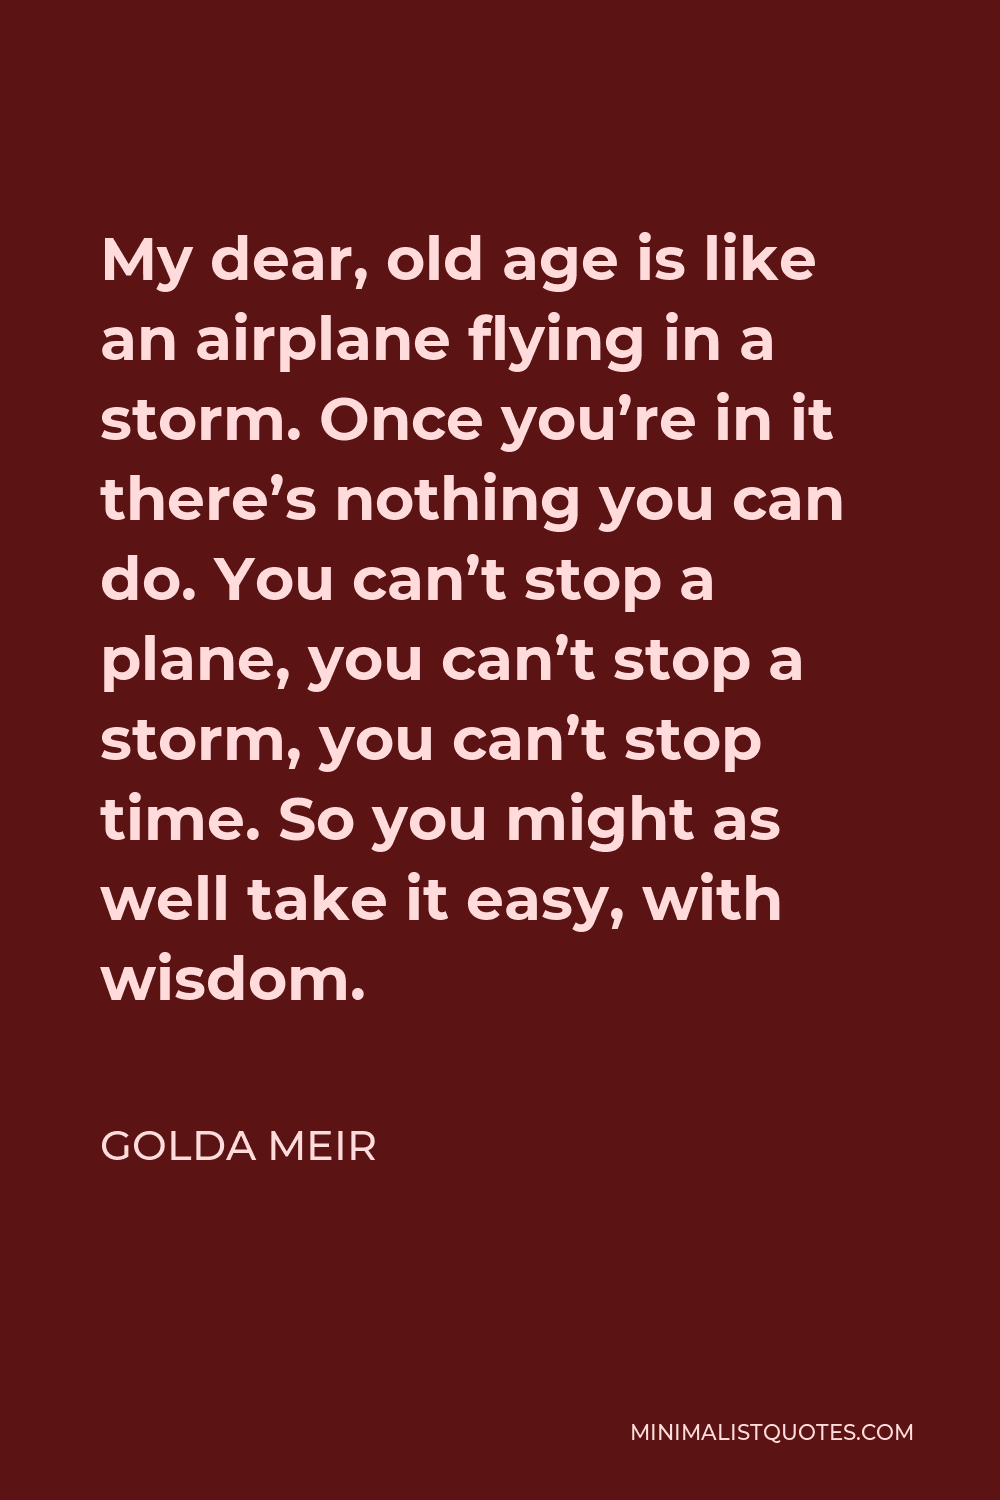 Golda Meir Quote - My dear, old age is like an airplane flying in a storm. Once you’re in it there’s nothing you can do. You can’t stop a plane, you can’t stop a storm, you can’t stop time. So you might as well take it easy, with wisdom.